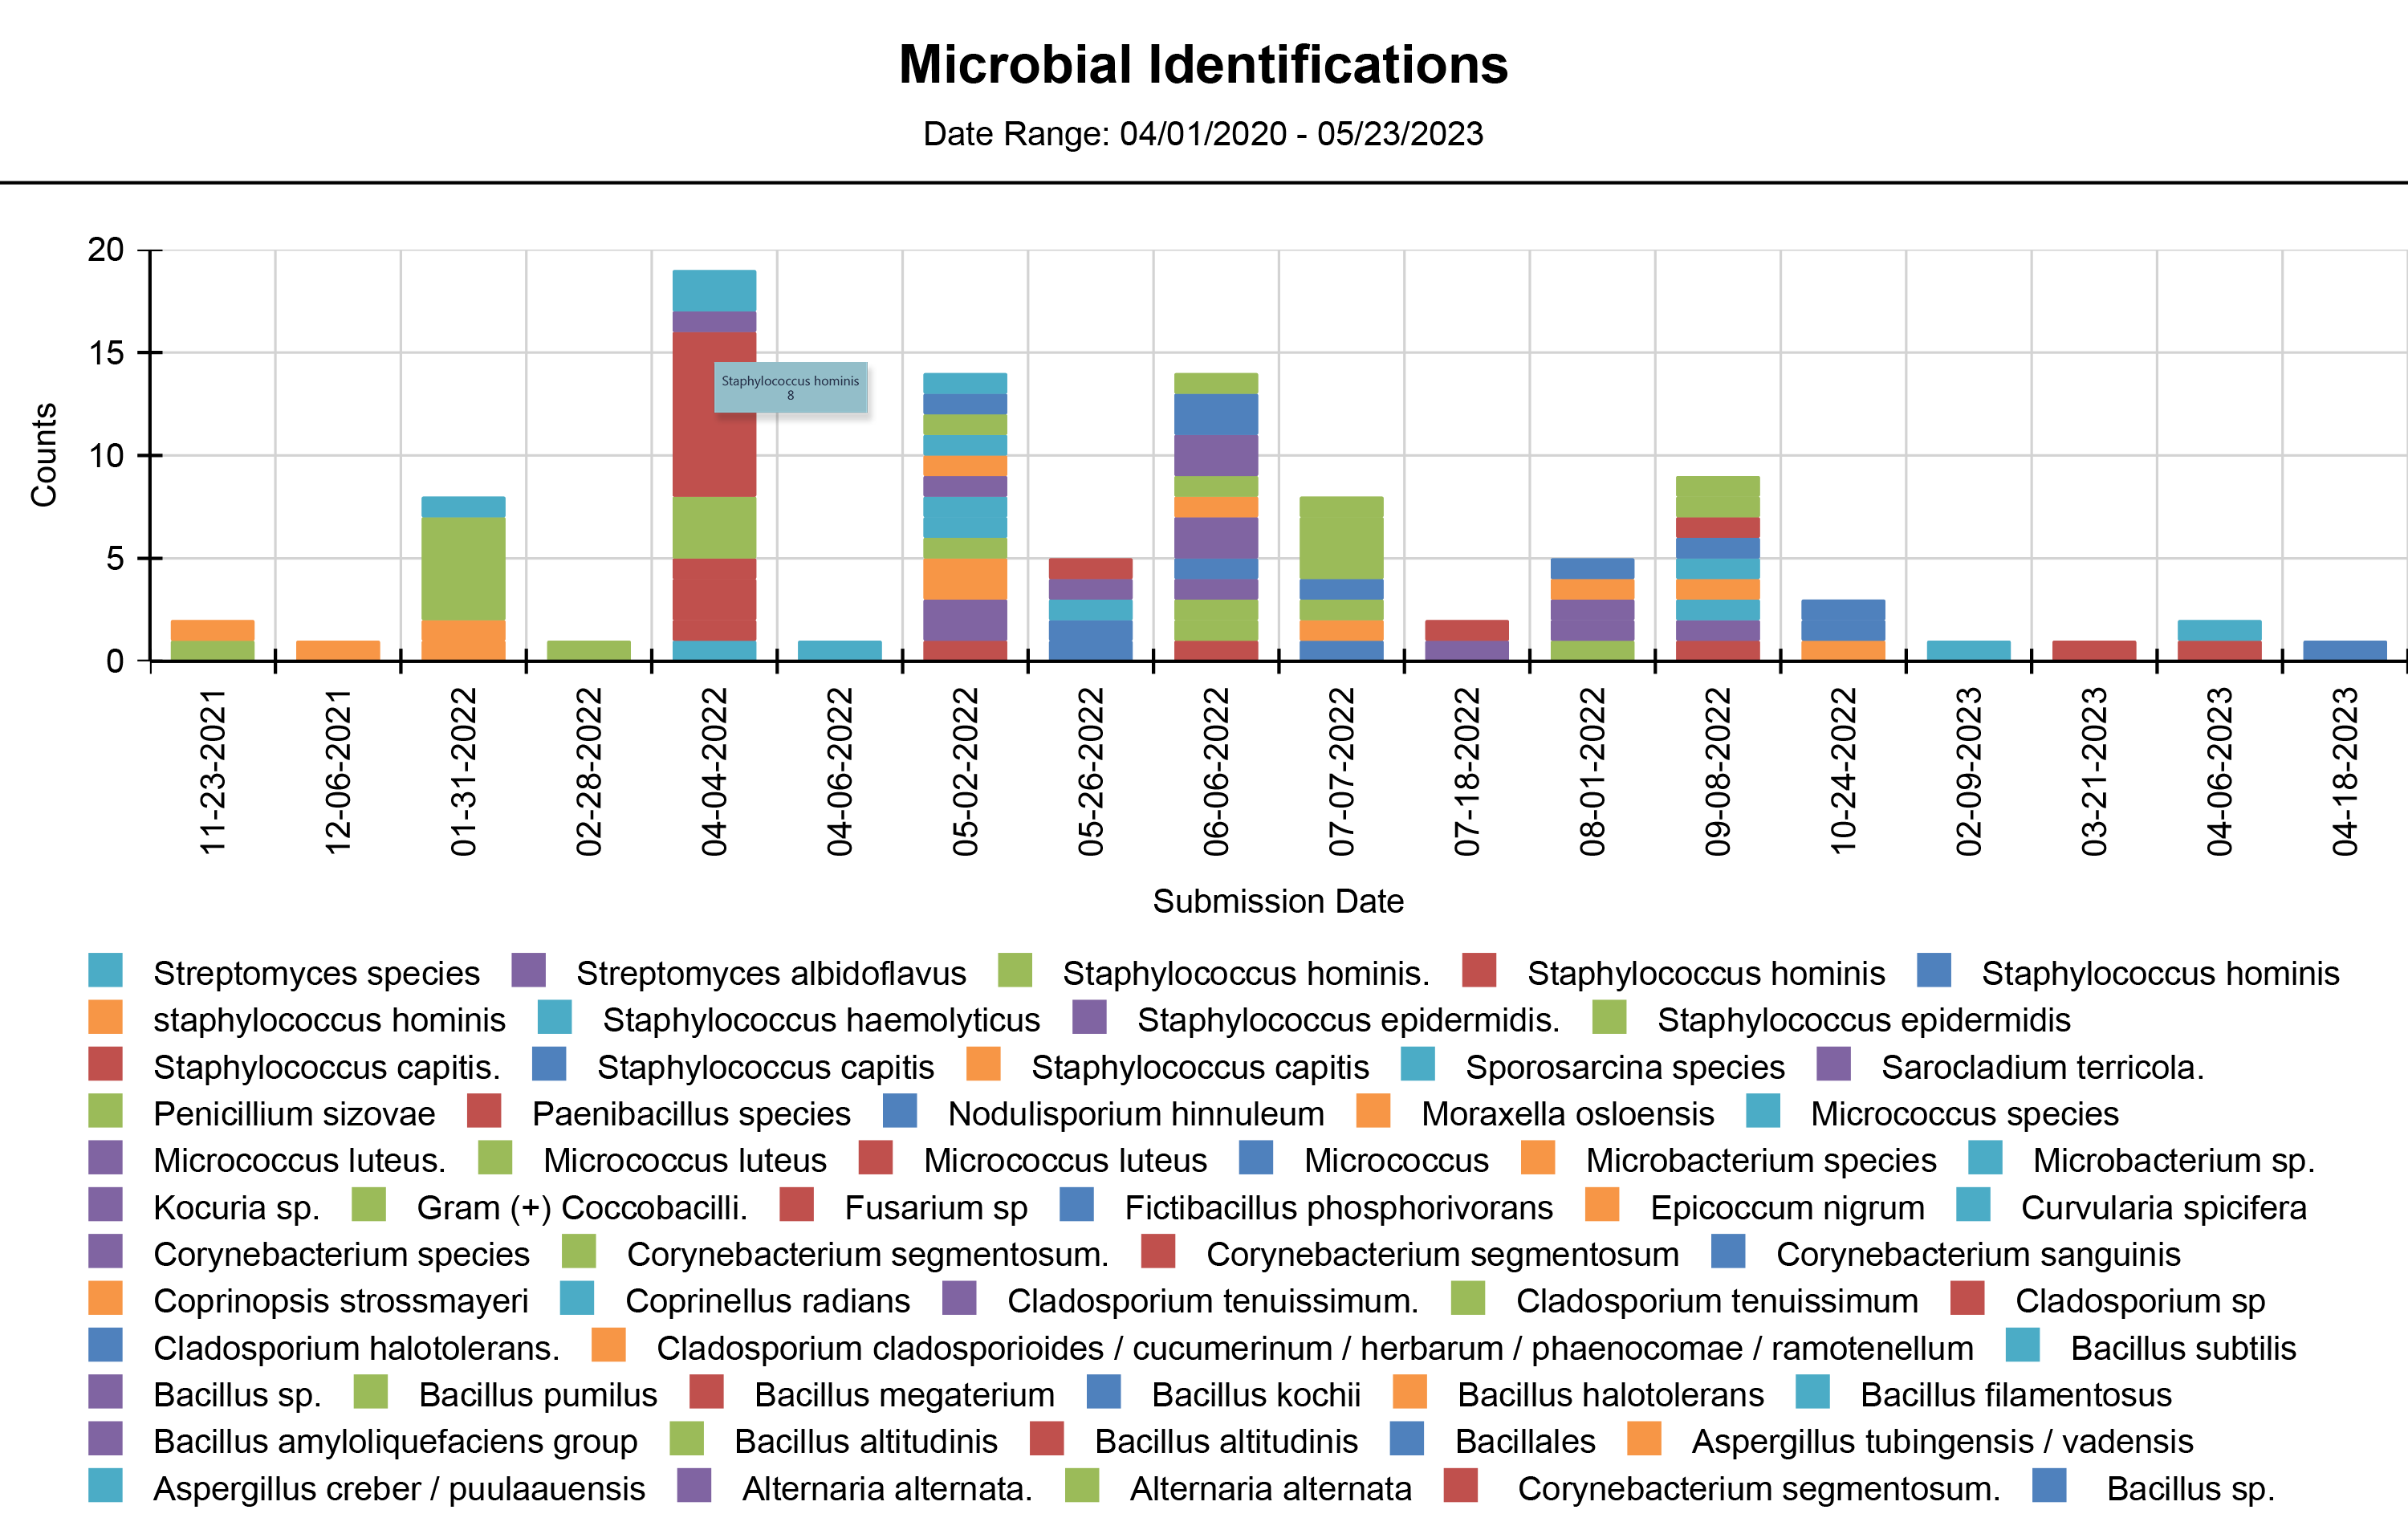 An image of an EagleTrax process control chart with microbial identifications.